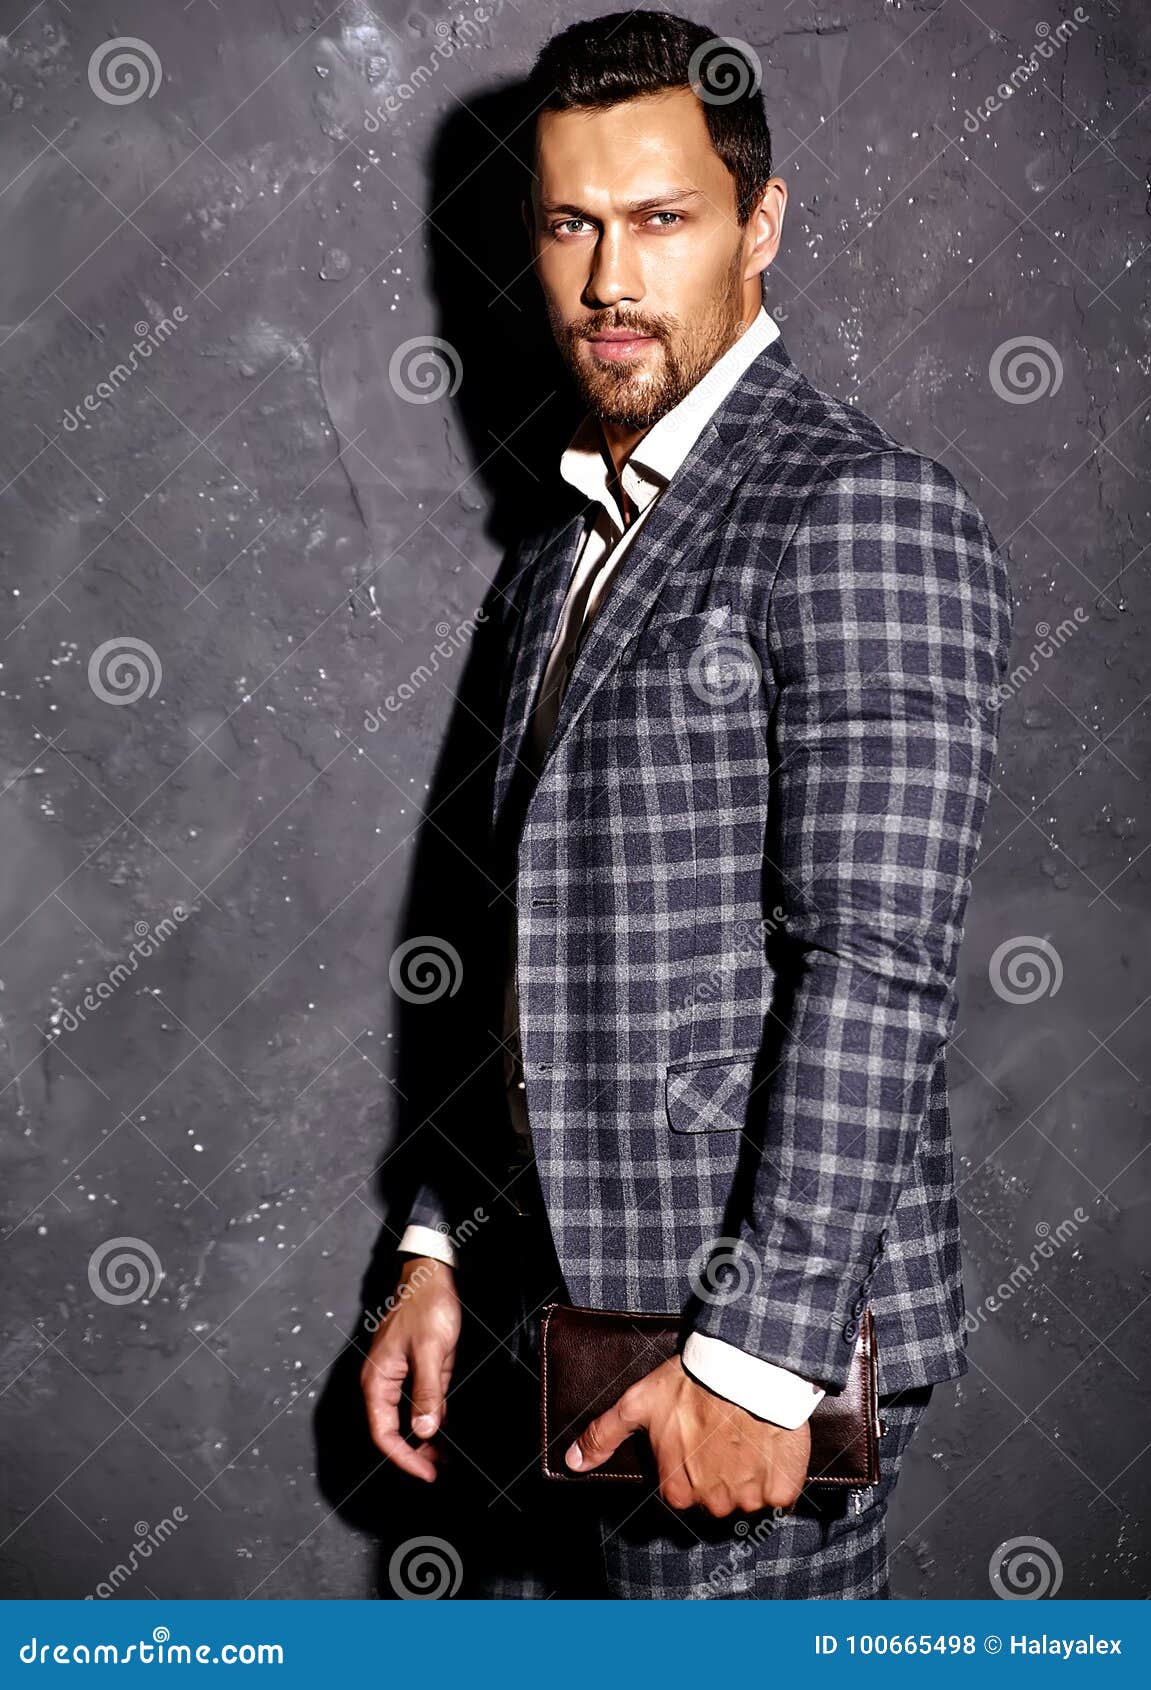 Handsome Fashion Male Model Man Dressed in Elegant Suit Stock Photo ...